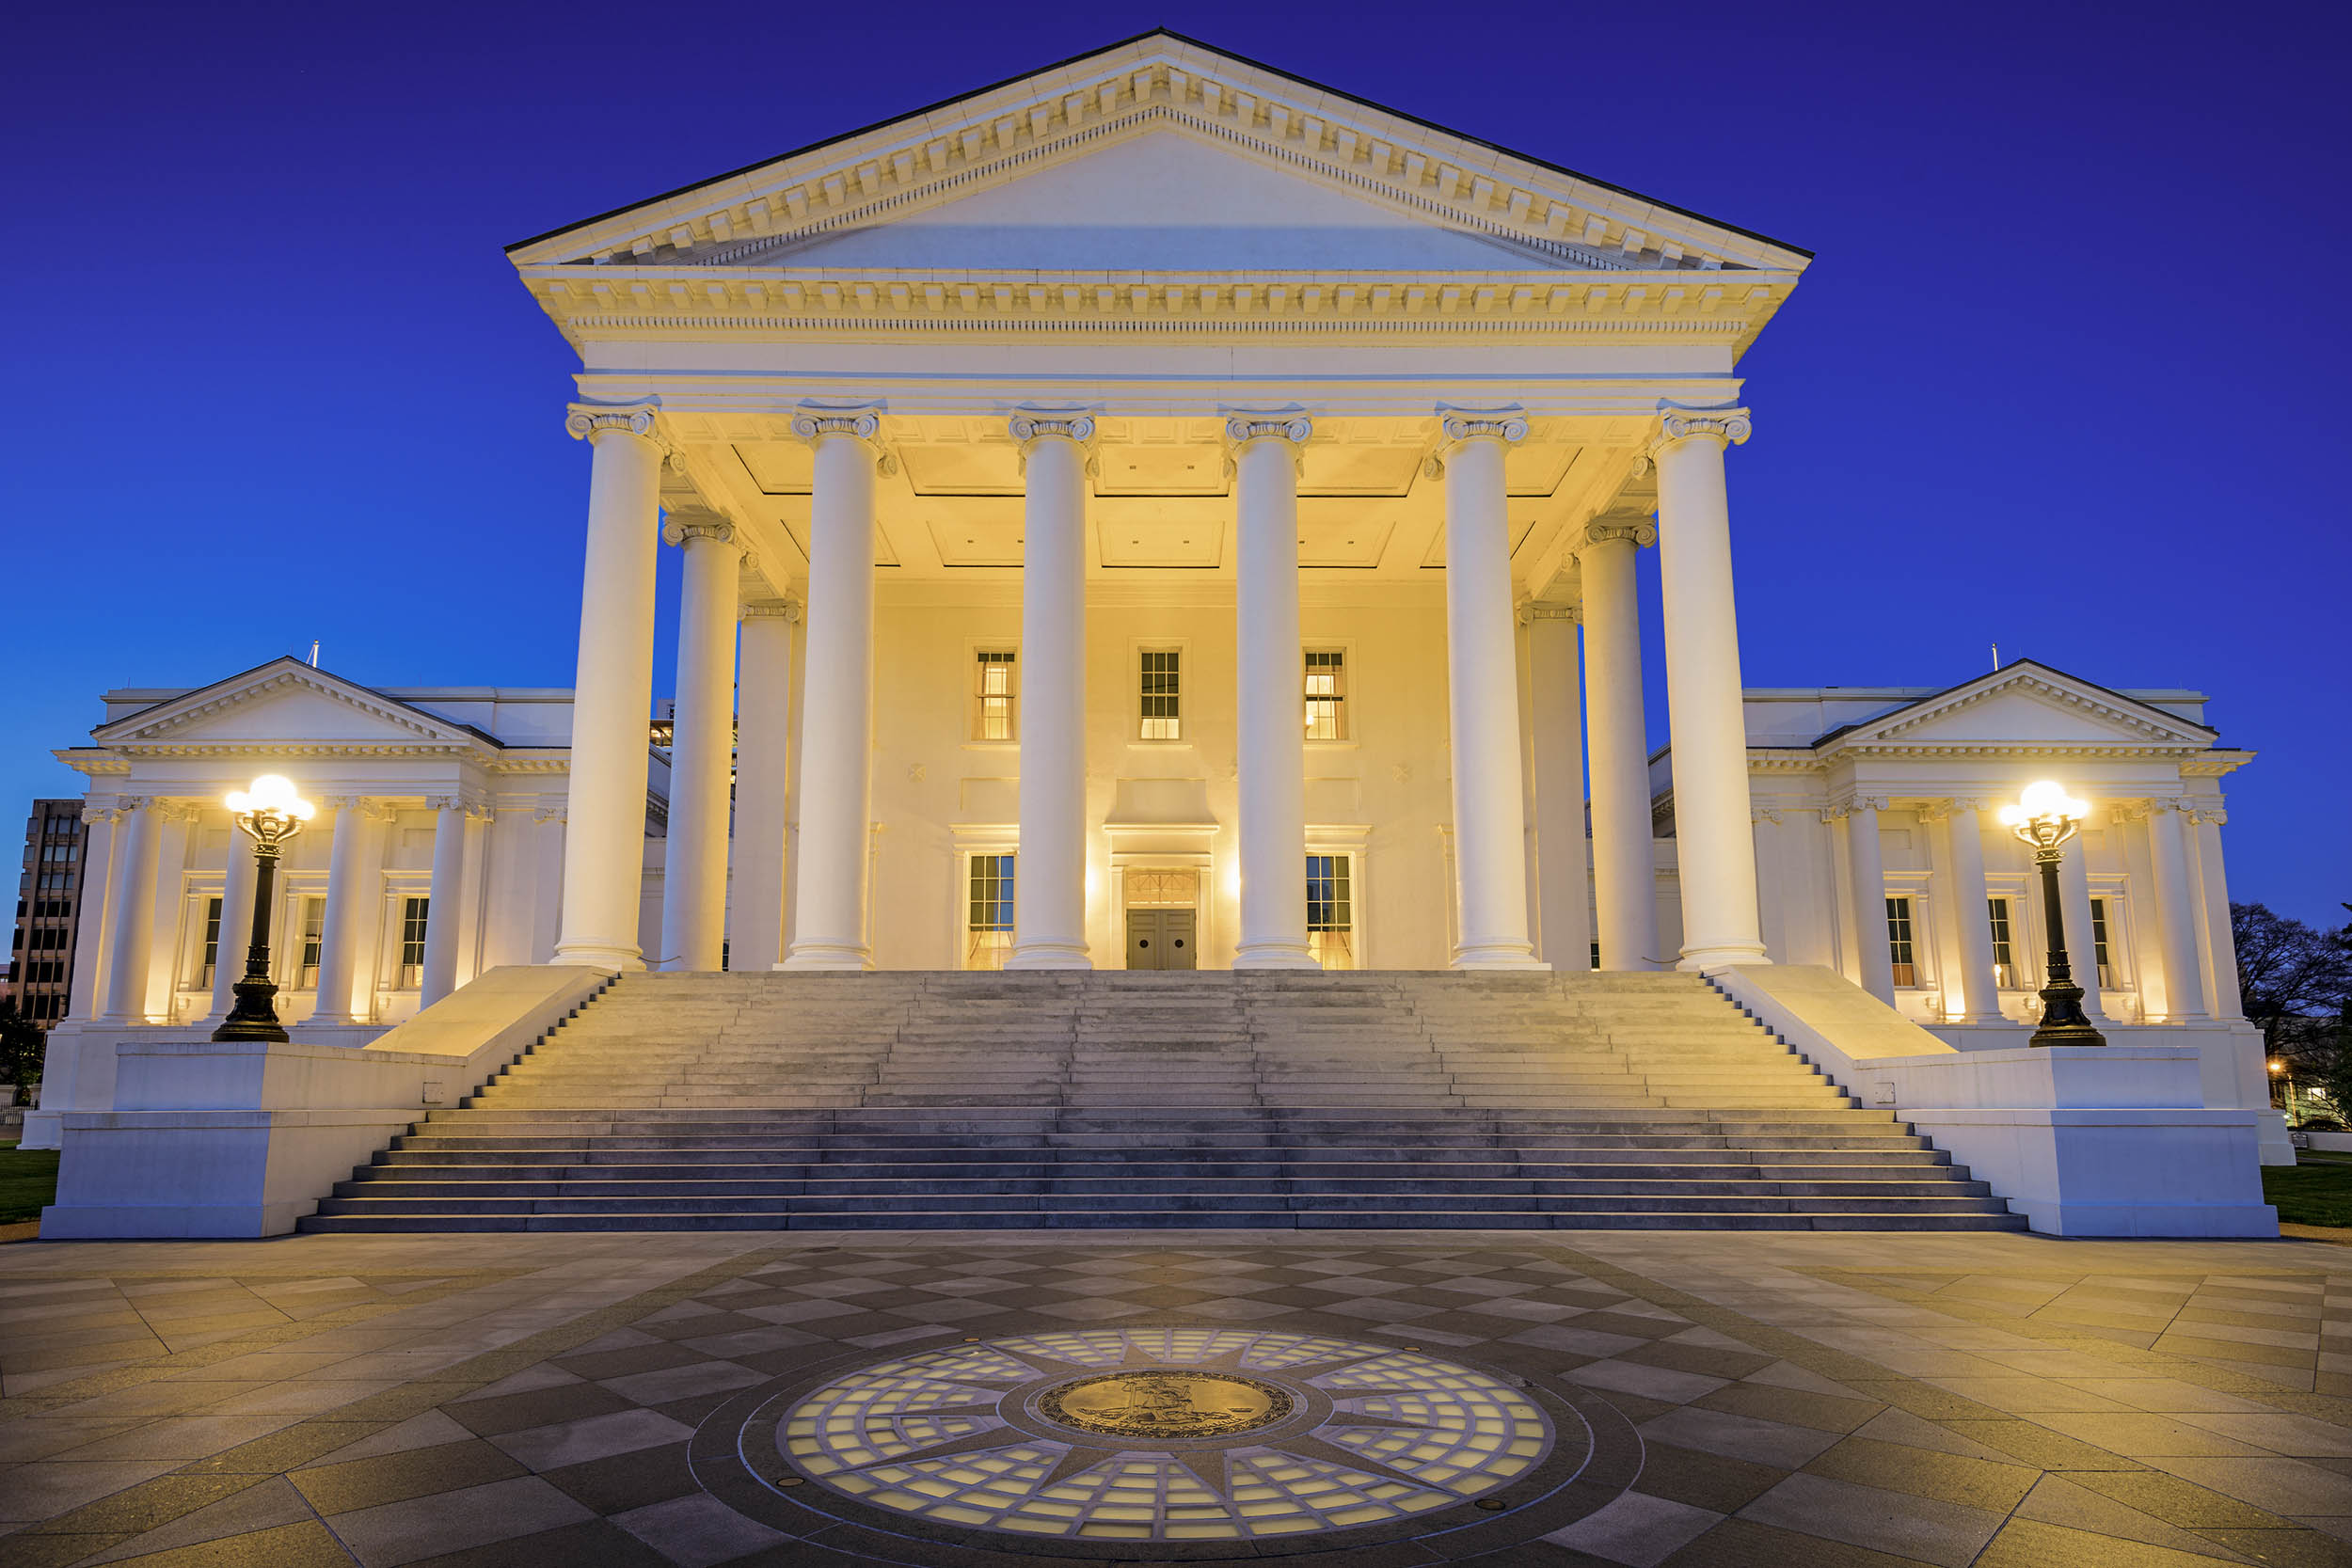 Virginia state Capitol building at dusk.  the white columns and steps are illuminated with yellow lights